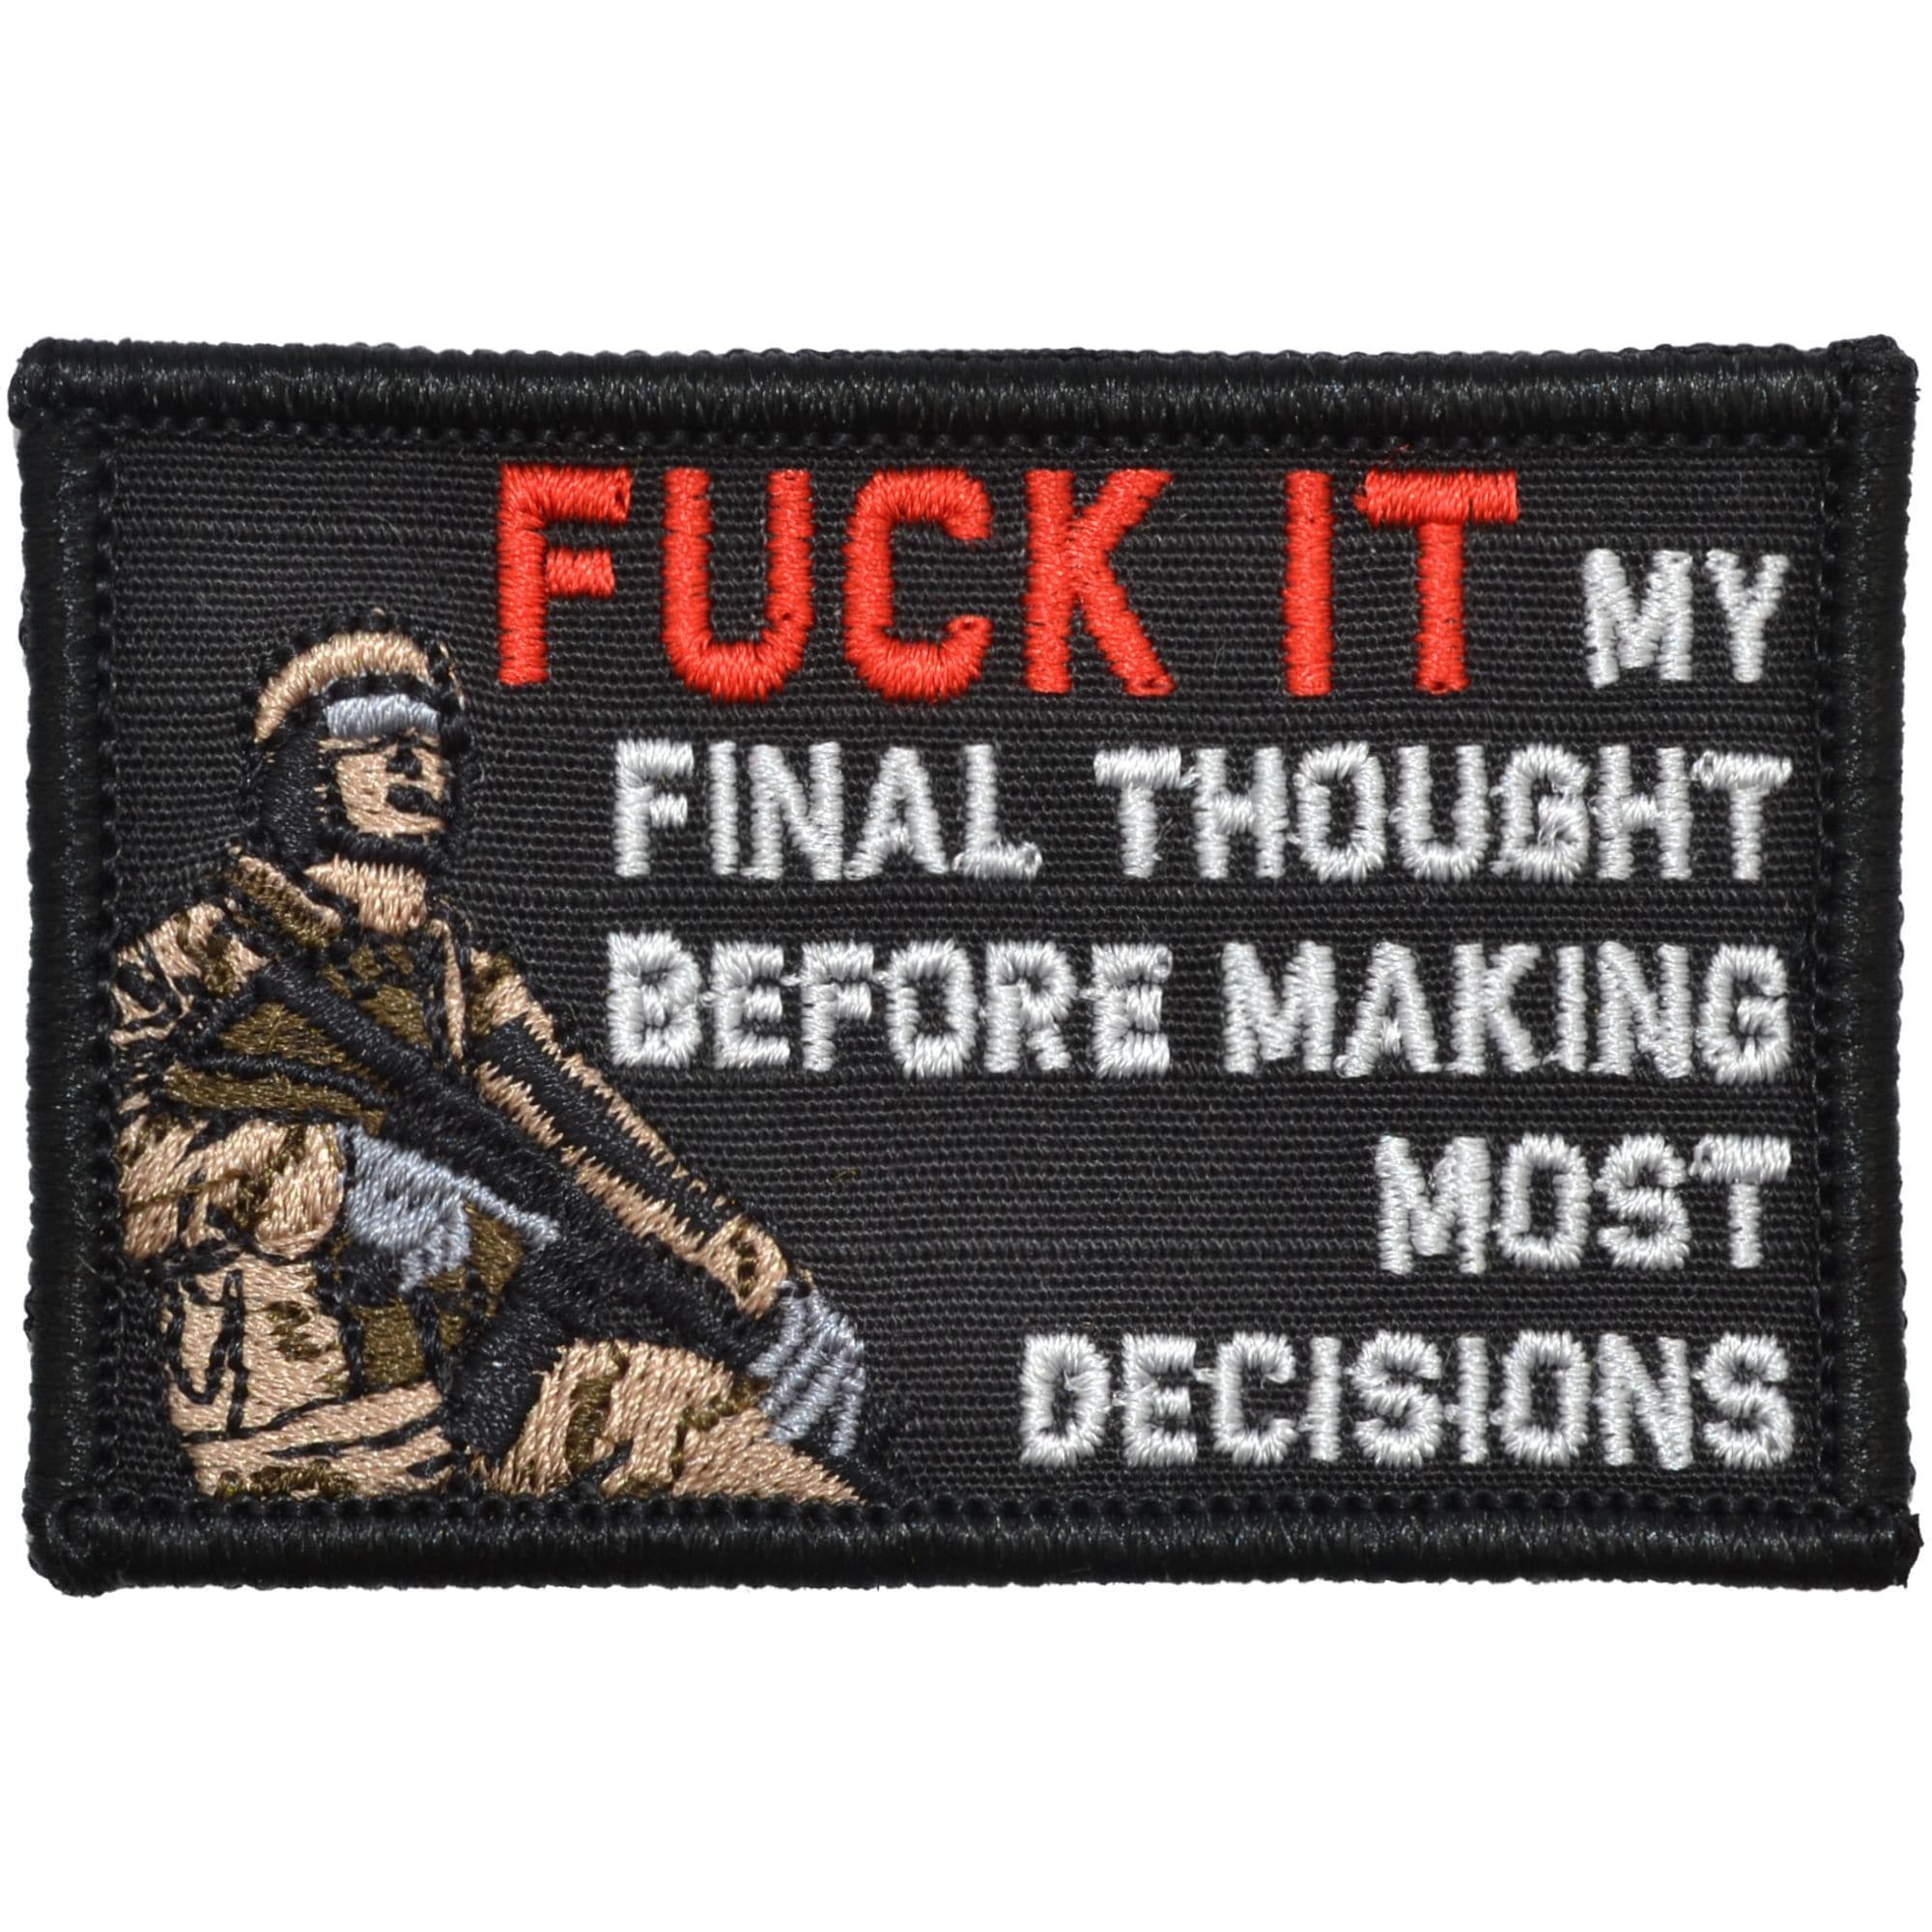 Tactical Gear Junkie Patches Black Fuck It My Final Thought Before Making Most Decisions - 2x3 Patch